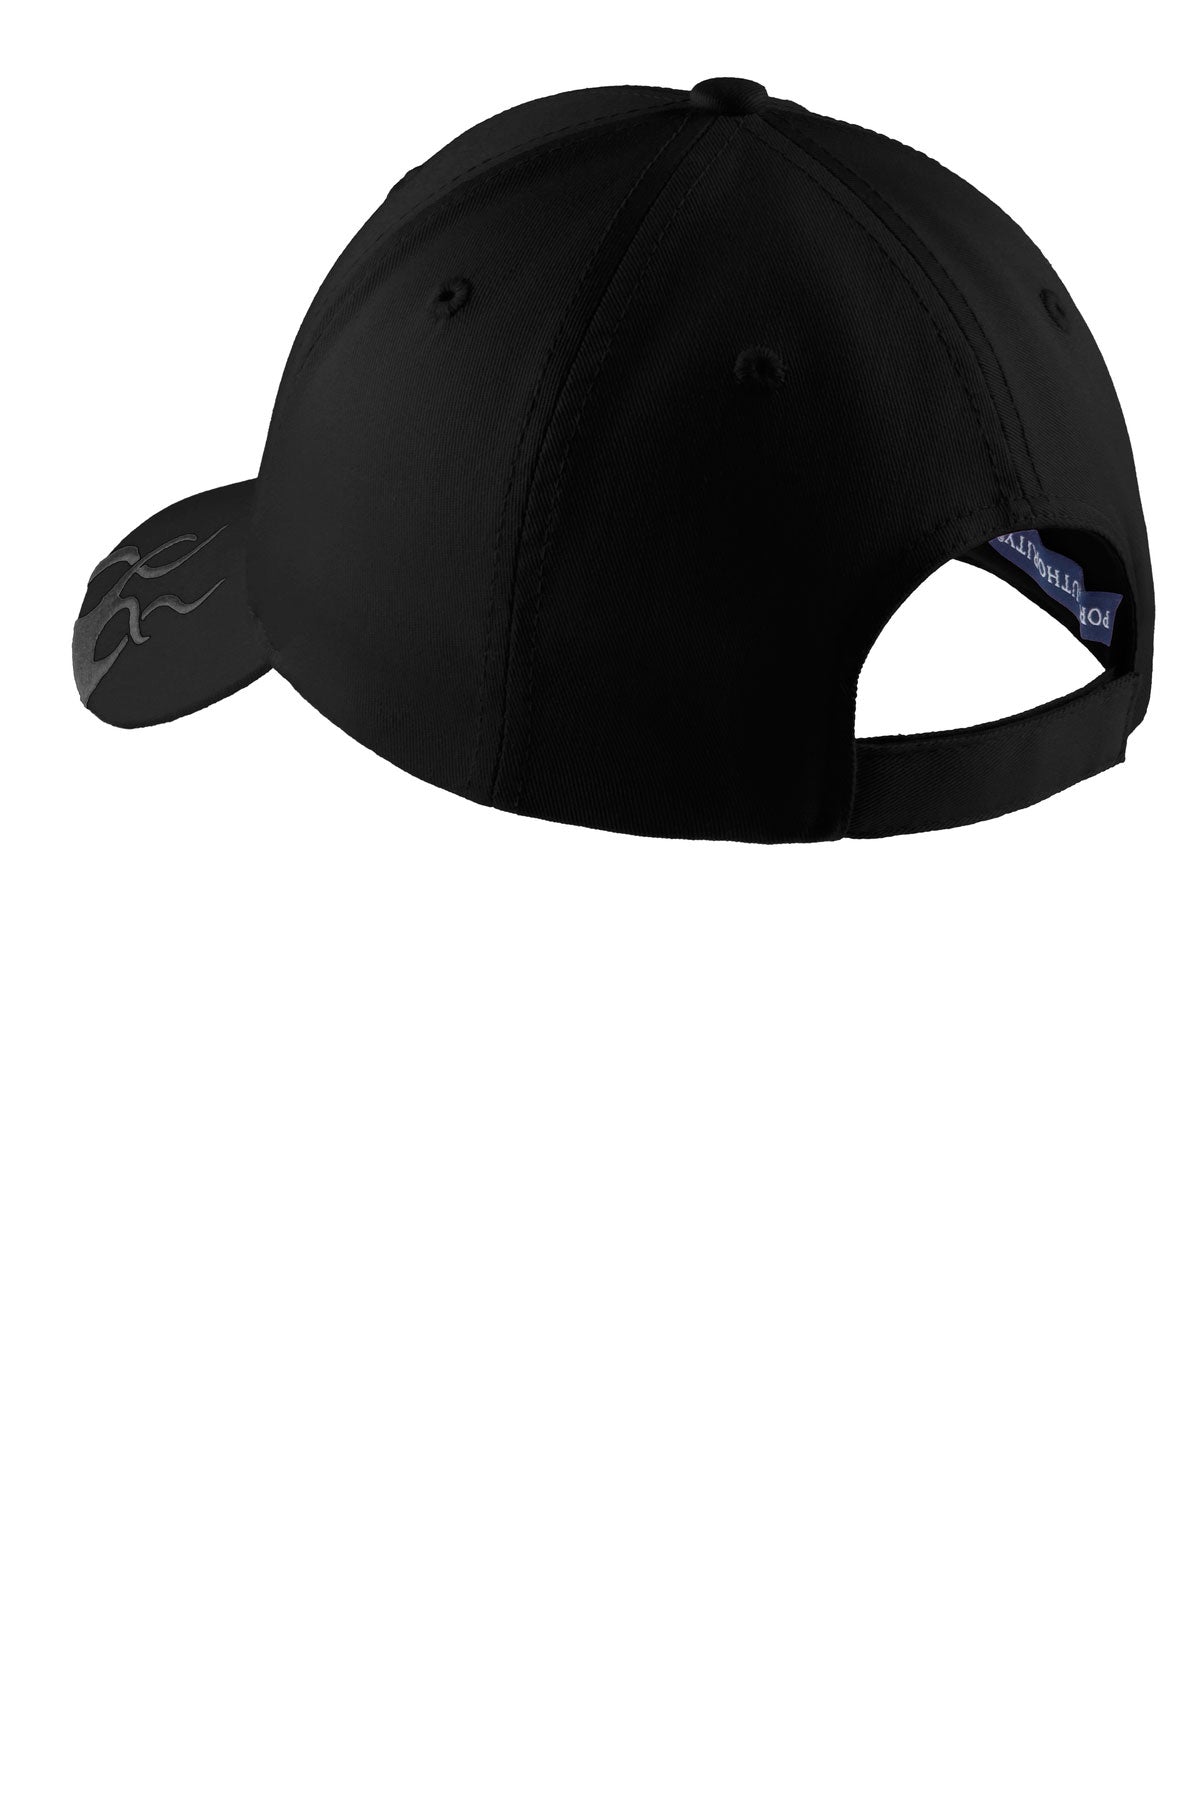 Port Authority Racing Cap with Flames C857 Black/Charcoal